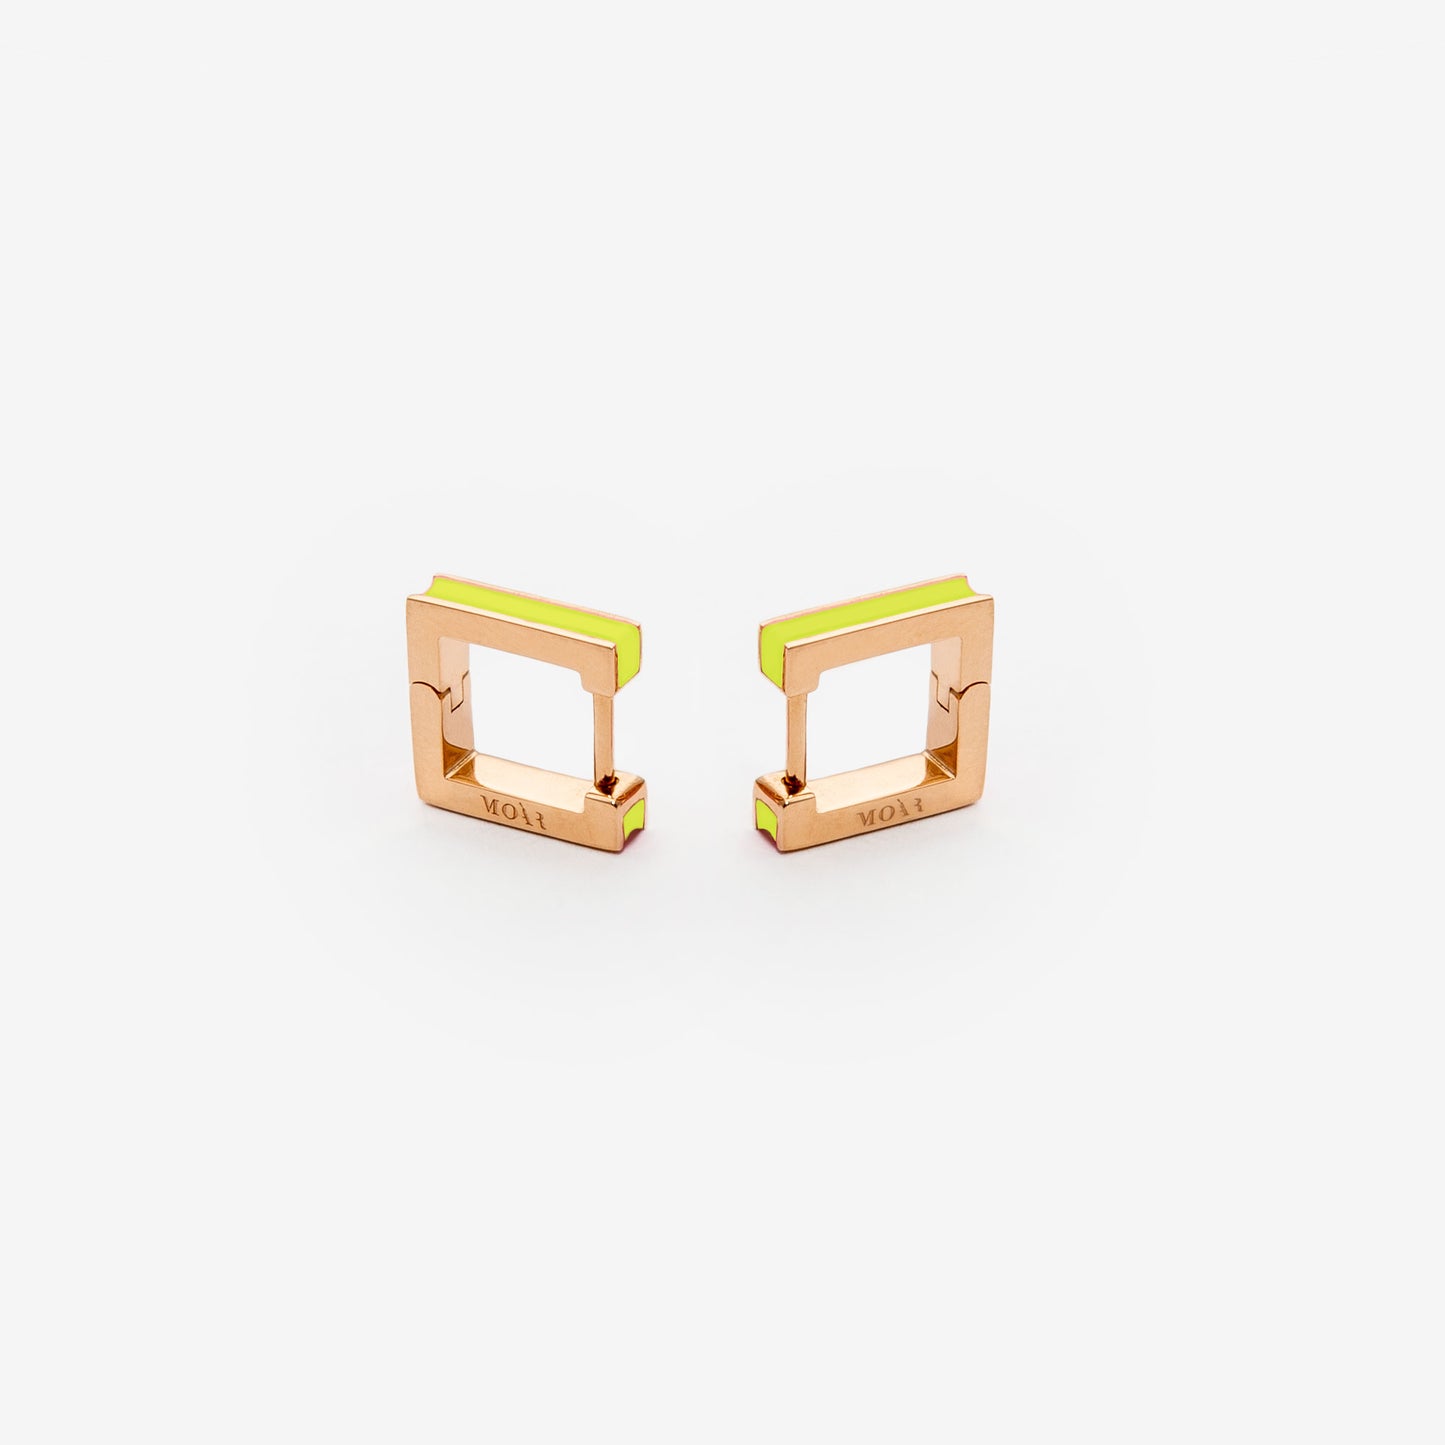 Square fluo yellow earrings